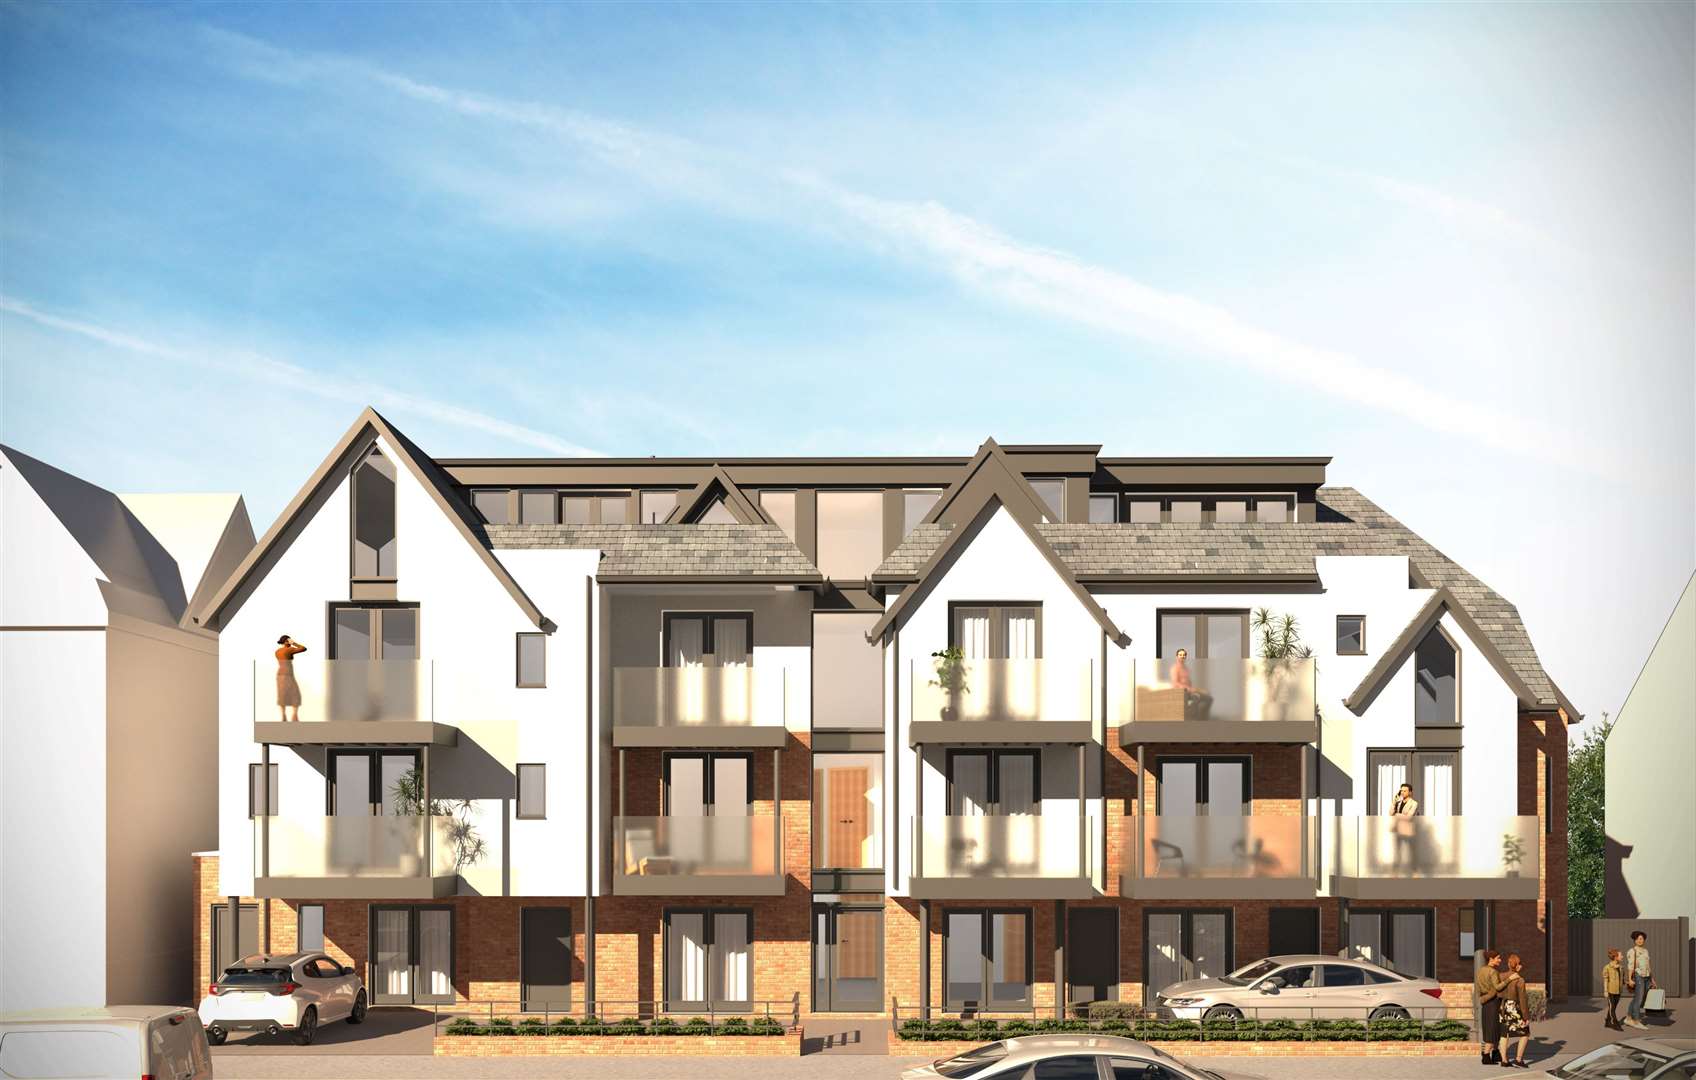 This promotional computer-generated image of the new Herne Bay development shows a red brick building partially painted white, with black pitch roofs and glass balconies. Photo: Miles & Barr